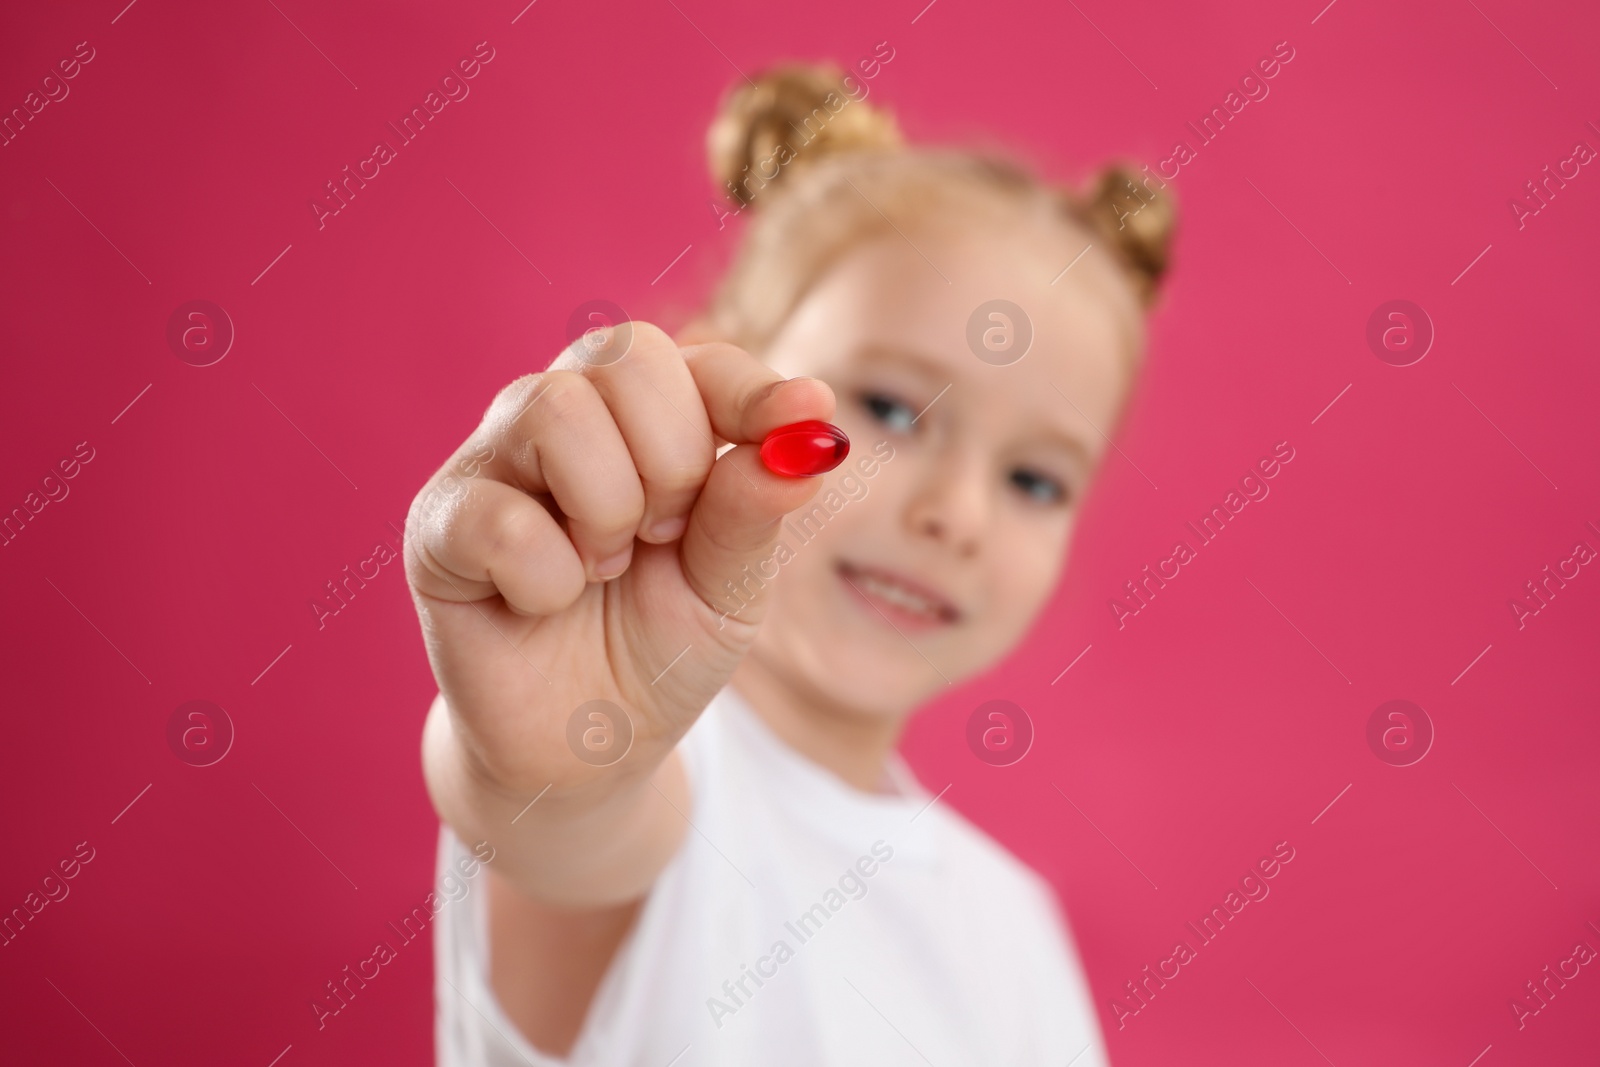 Photo of Little girl with vitamin pill against pink background, focus on hand